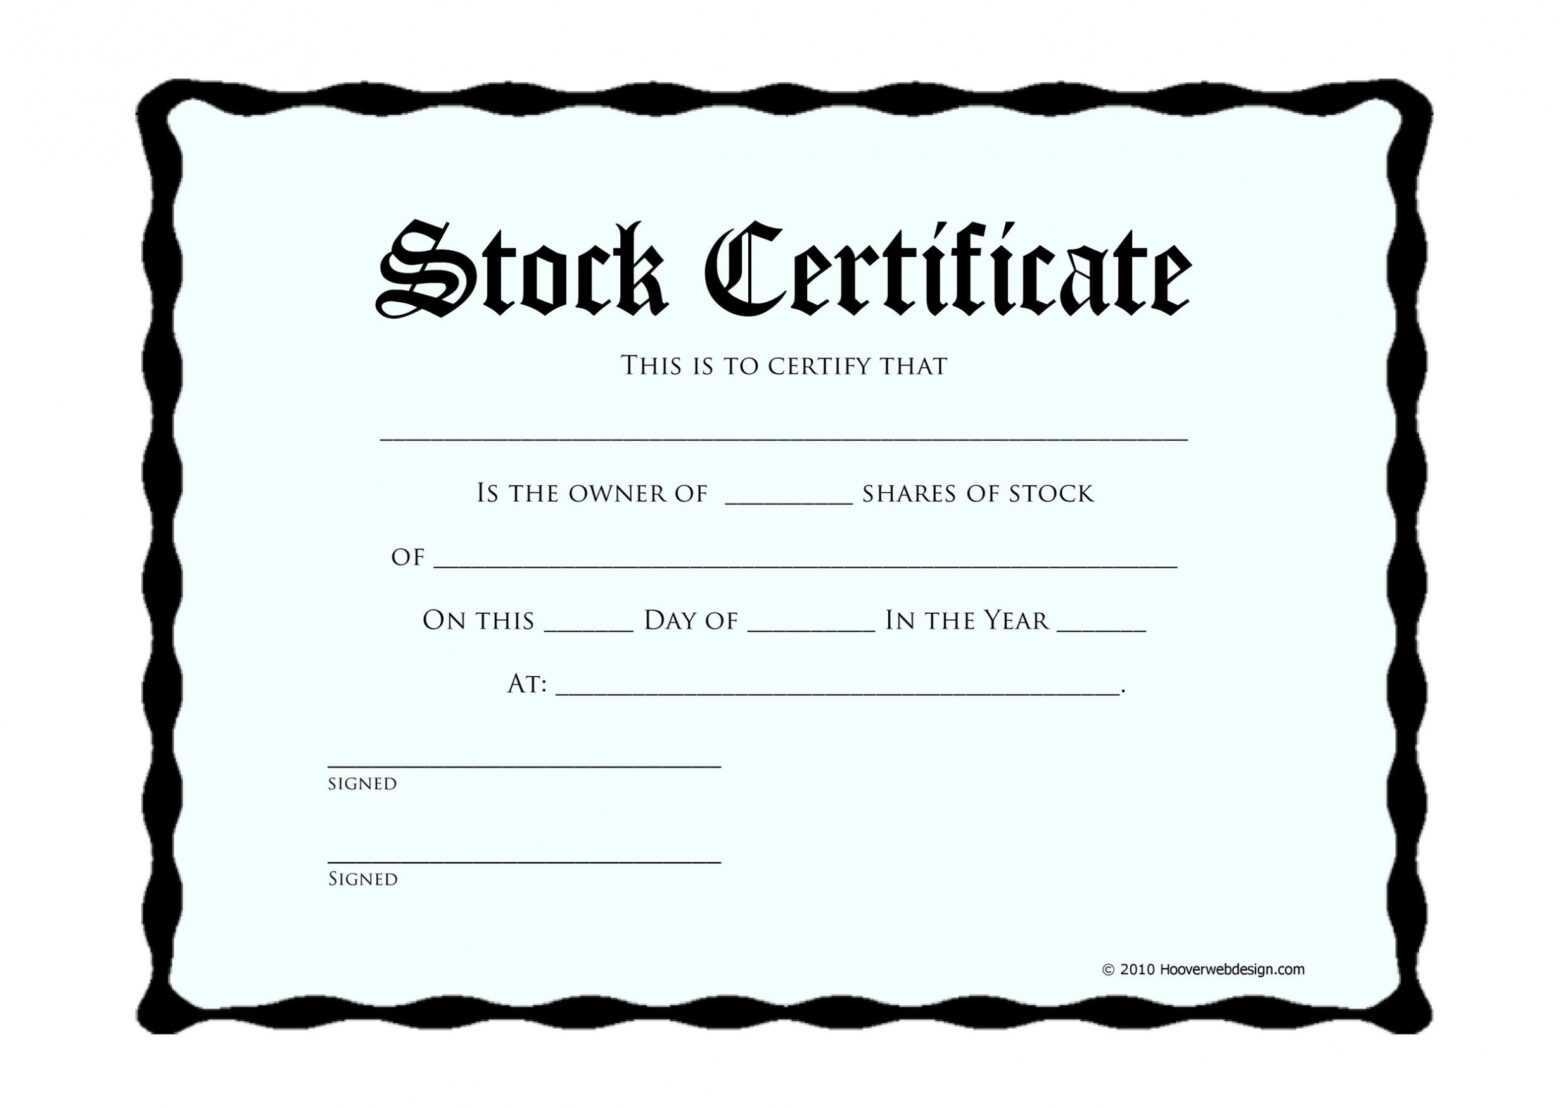 40+ Free Stock Certificate Templates (Word, Pdf) ᐅ Templatelab throughout Blank Share Certificate Template Free